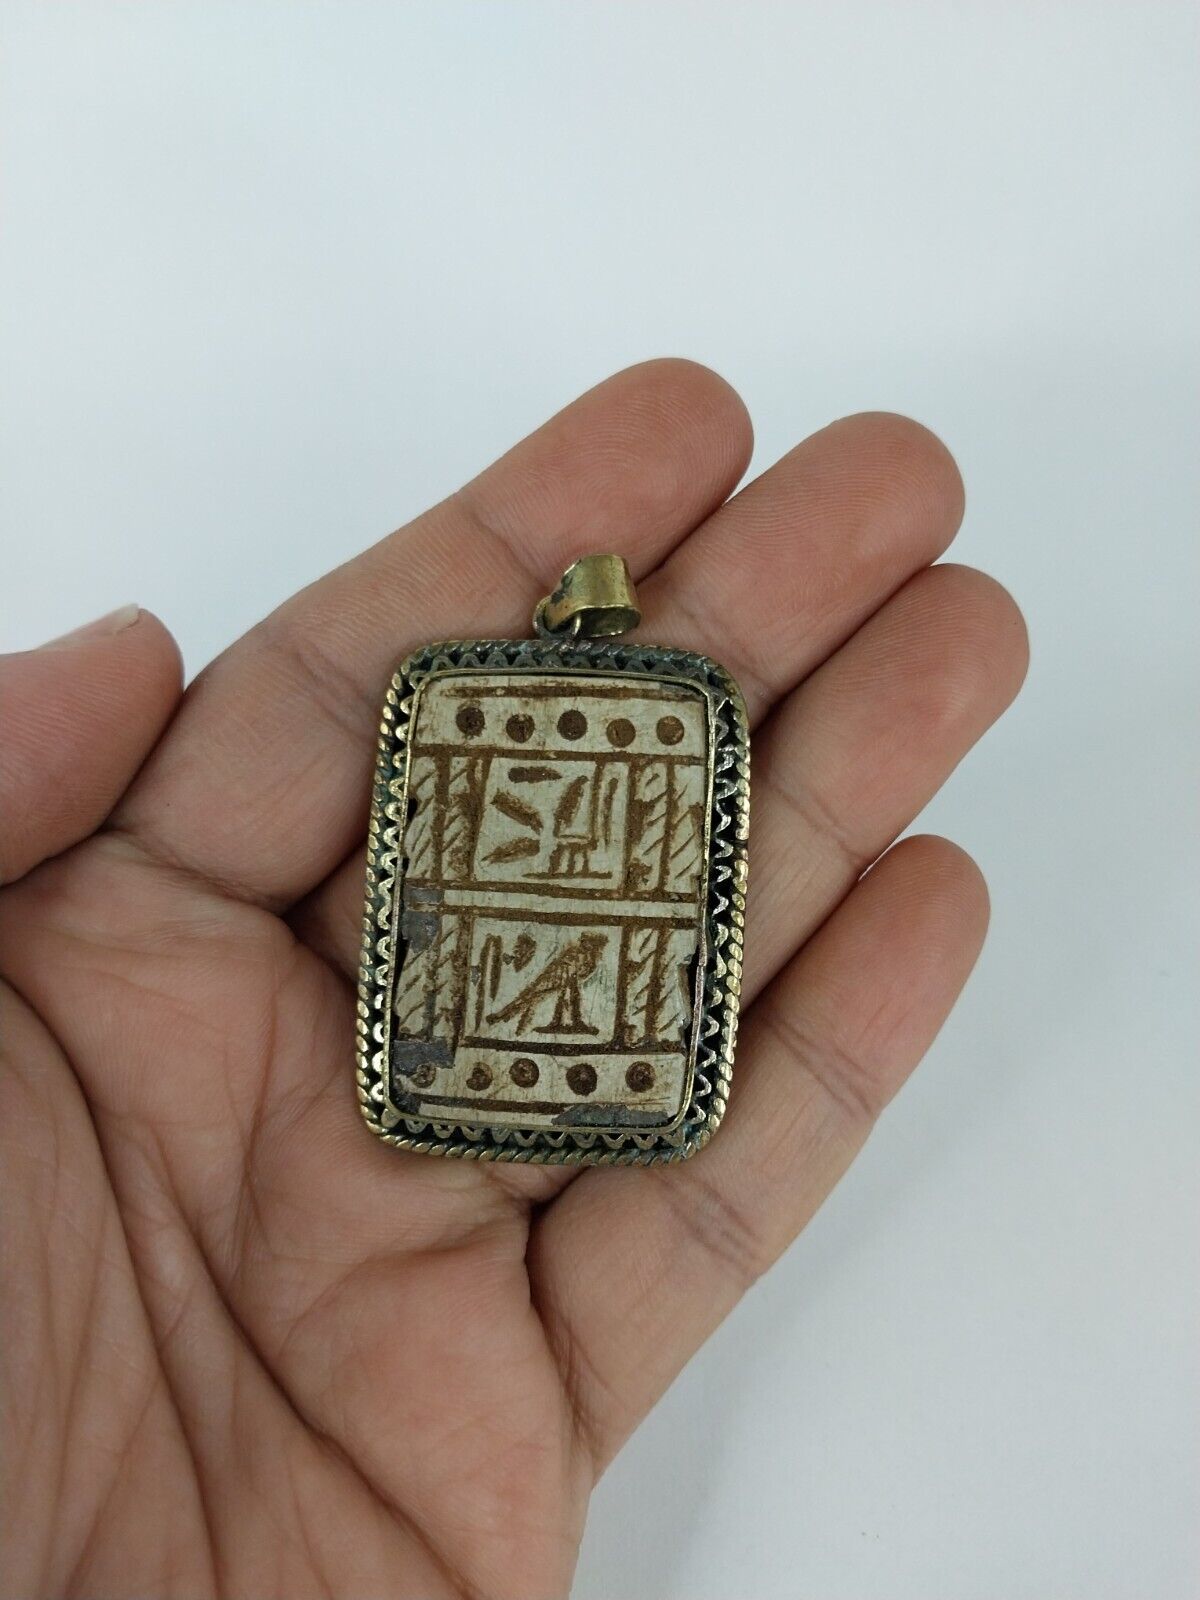 RARE ANCIENT EGYPTIAN ANTIQUE Book of Pharaonic Stone Pendent Necklace